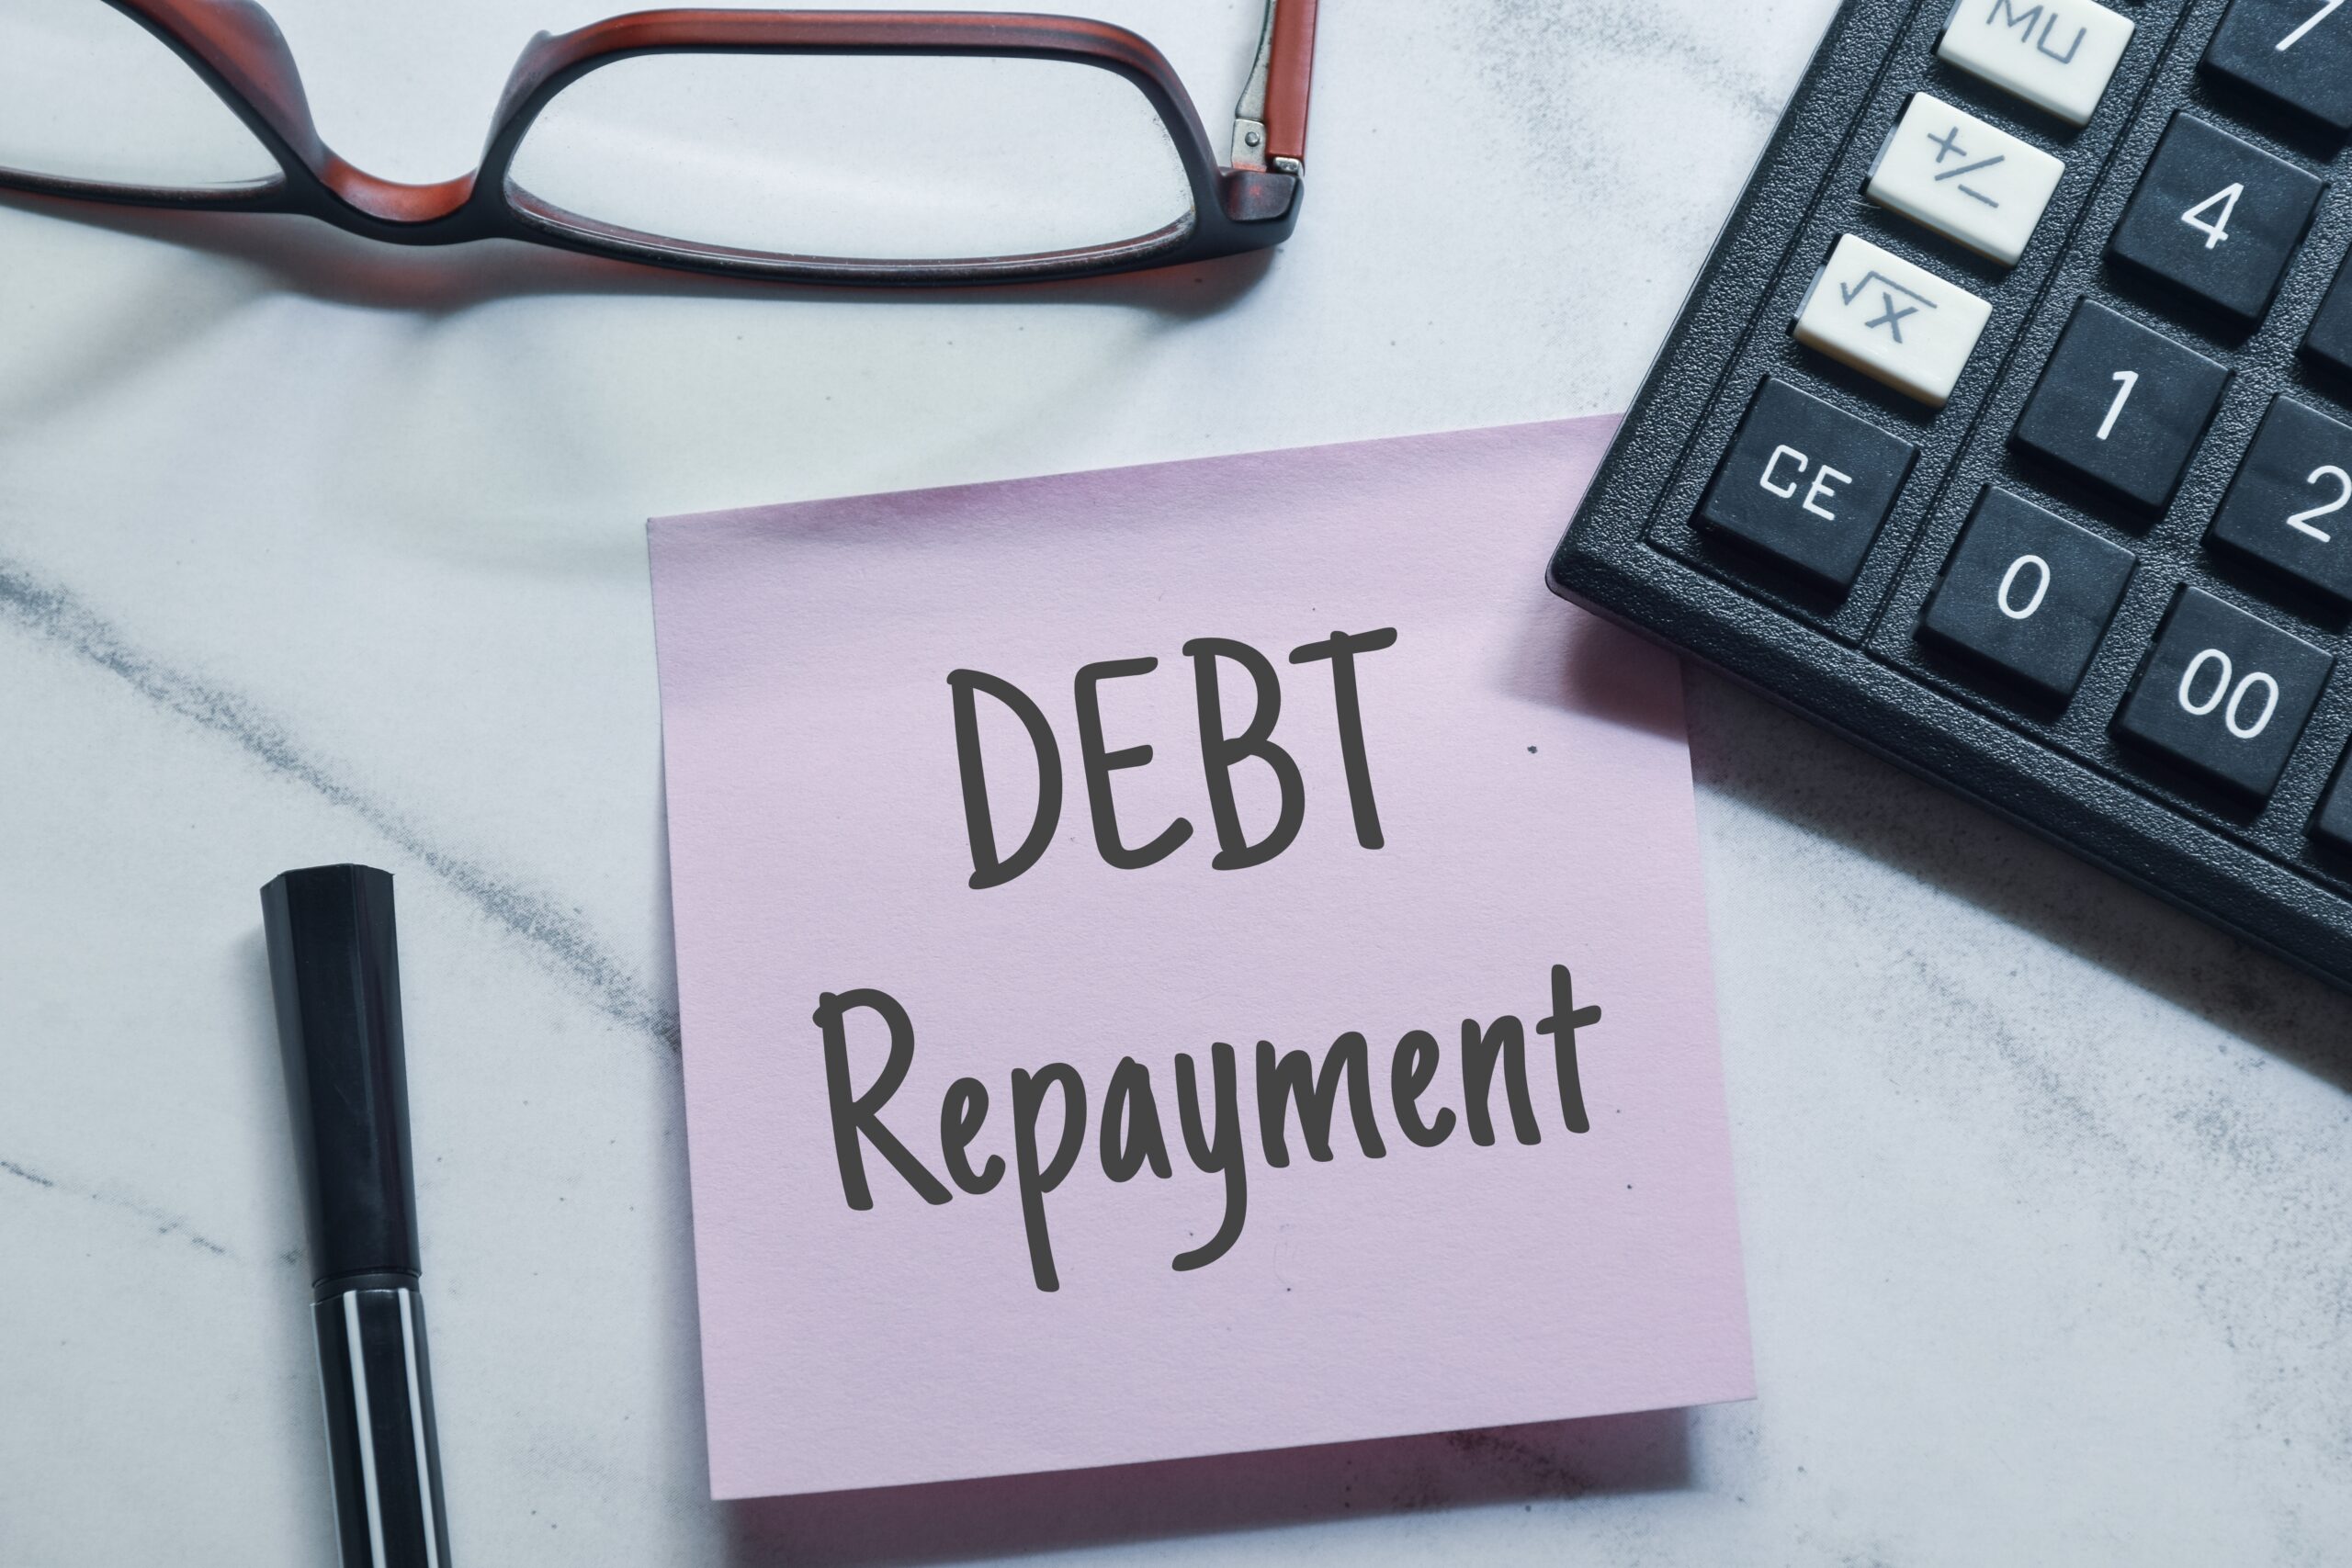 learn to use debt repayment calculator effectively